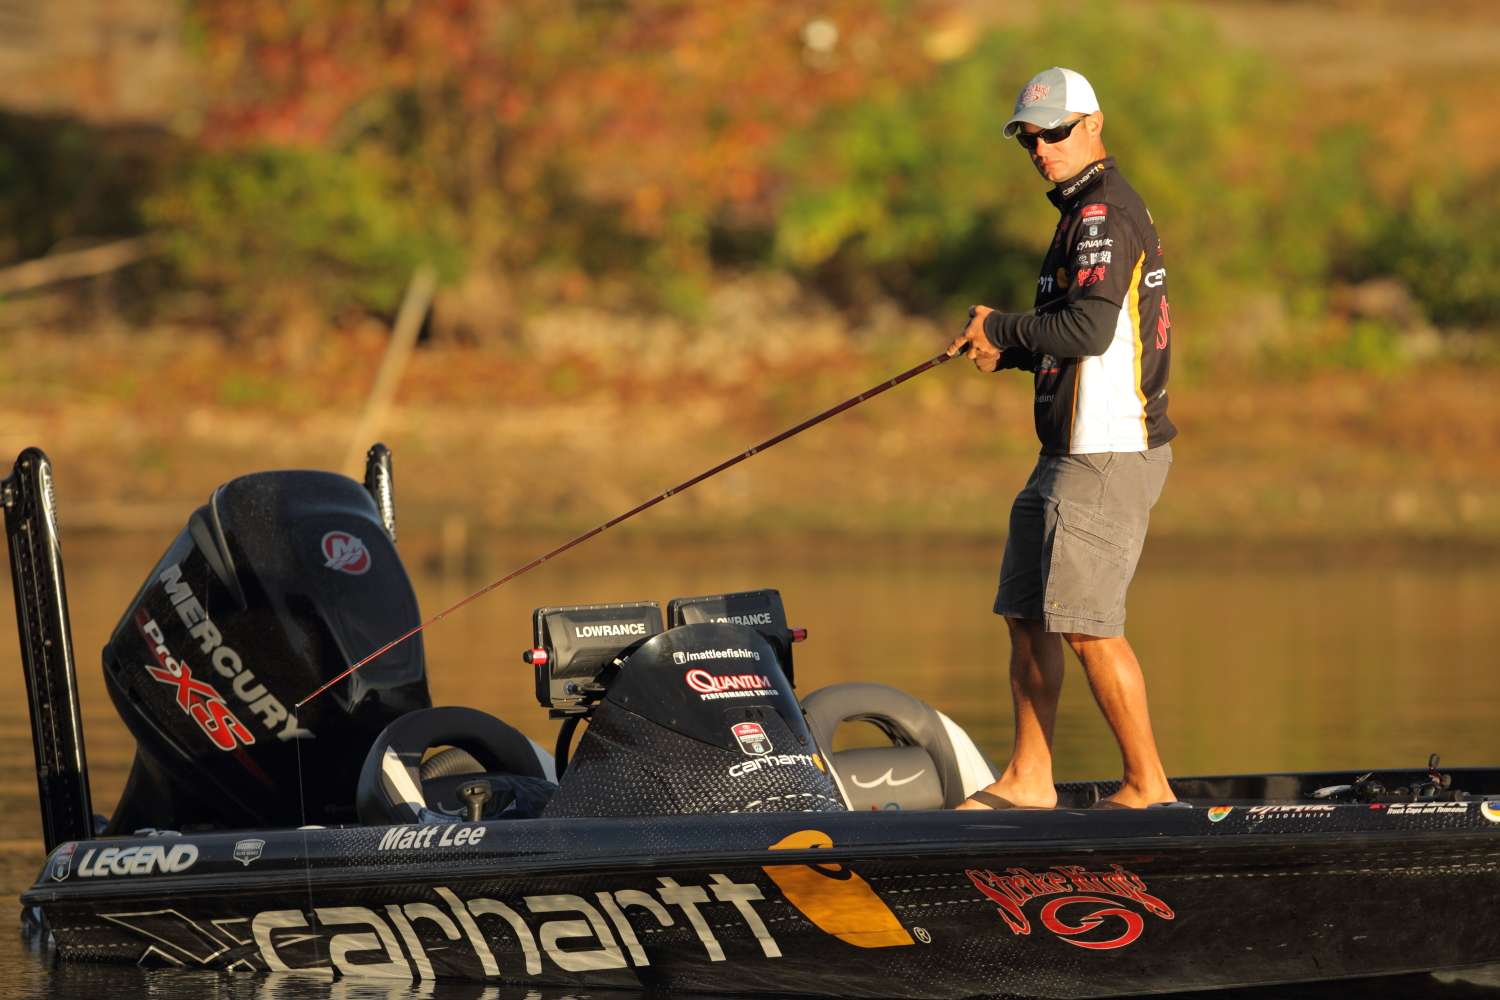 The highlights of Lee's first season fishing the Bassmaster Elite Series included a Top 20 finish on Lake Guntersville and a Top 25 finish in BASSfest on Kentucky Lake. All told, Lee earned a check in four 2015 Elite events.